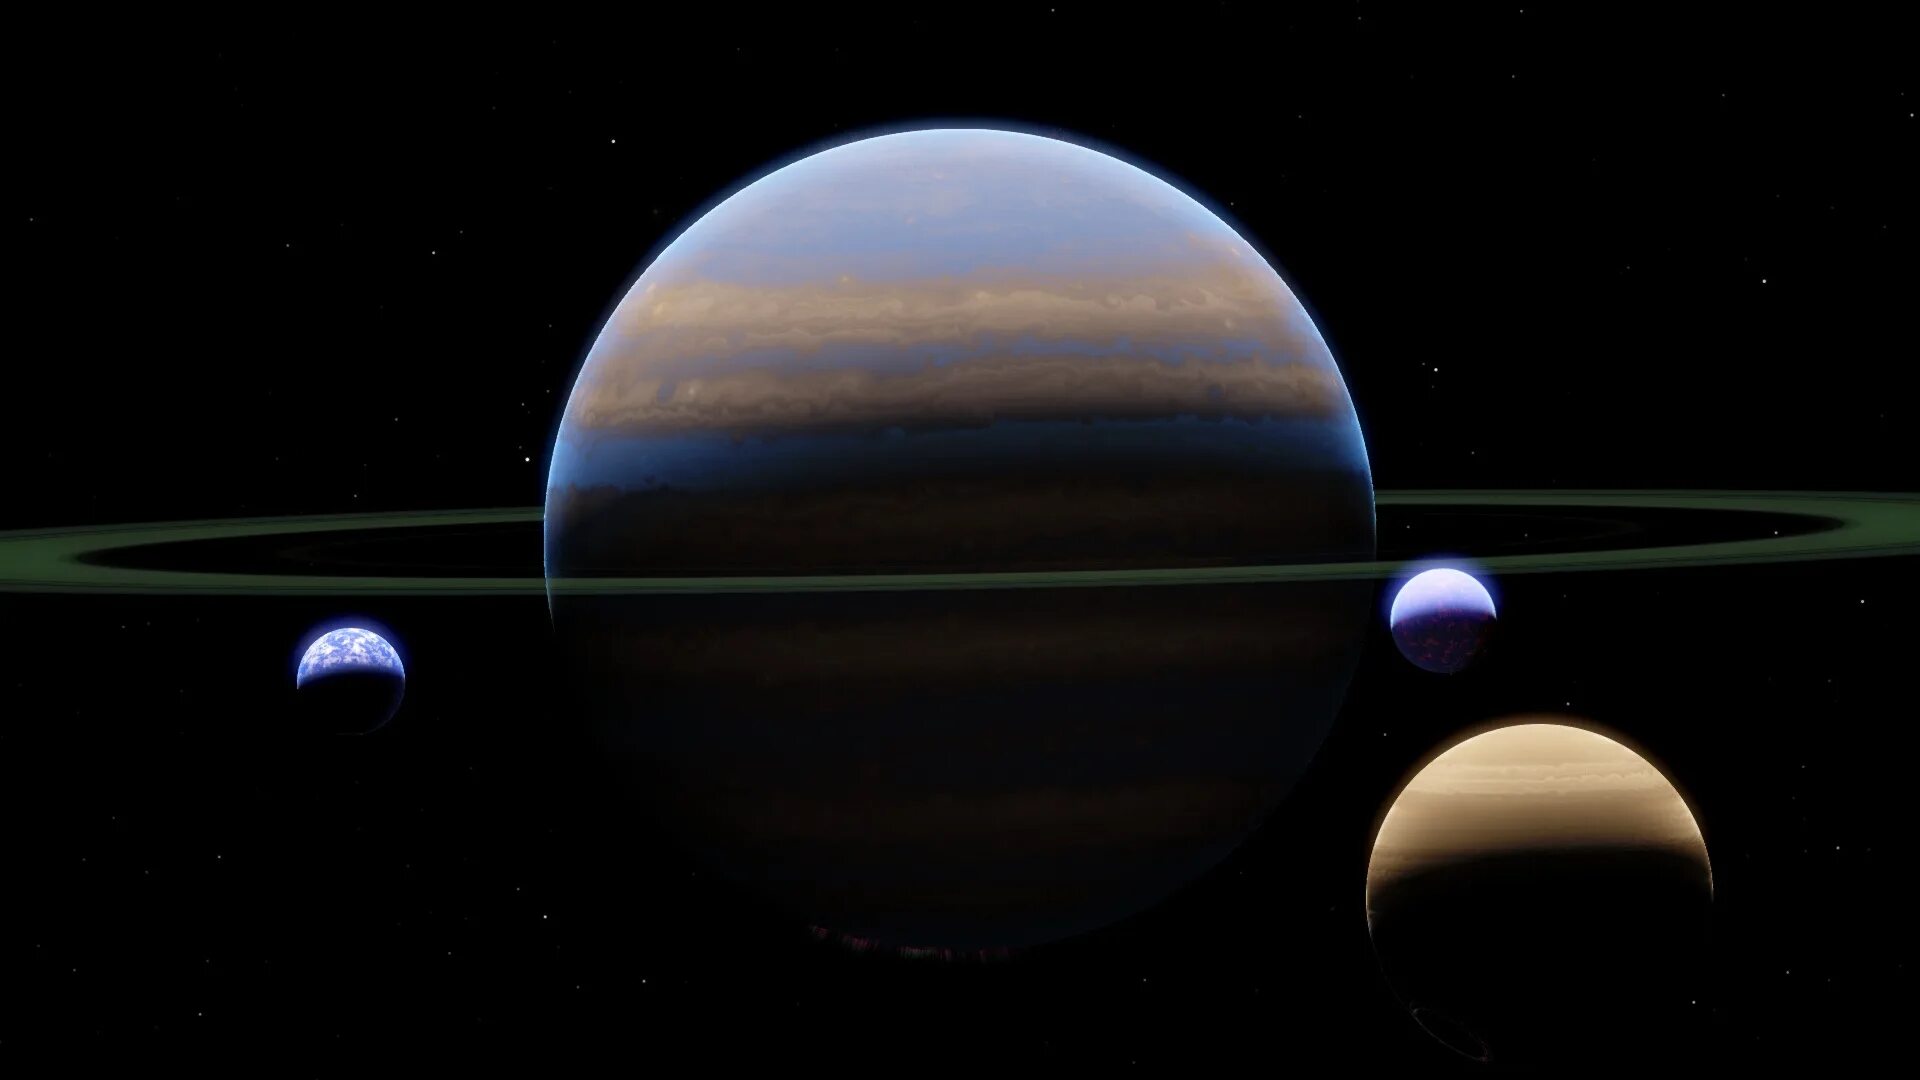 Gas giant surface. Gas giant Moons photo. Gas giant Sprite. Moon system